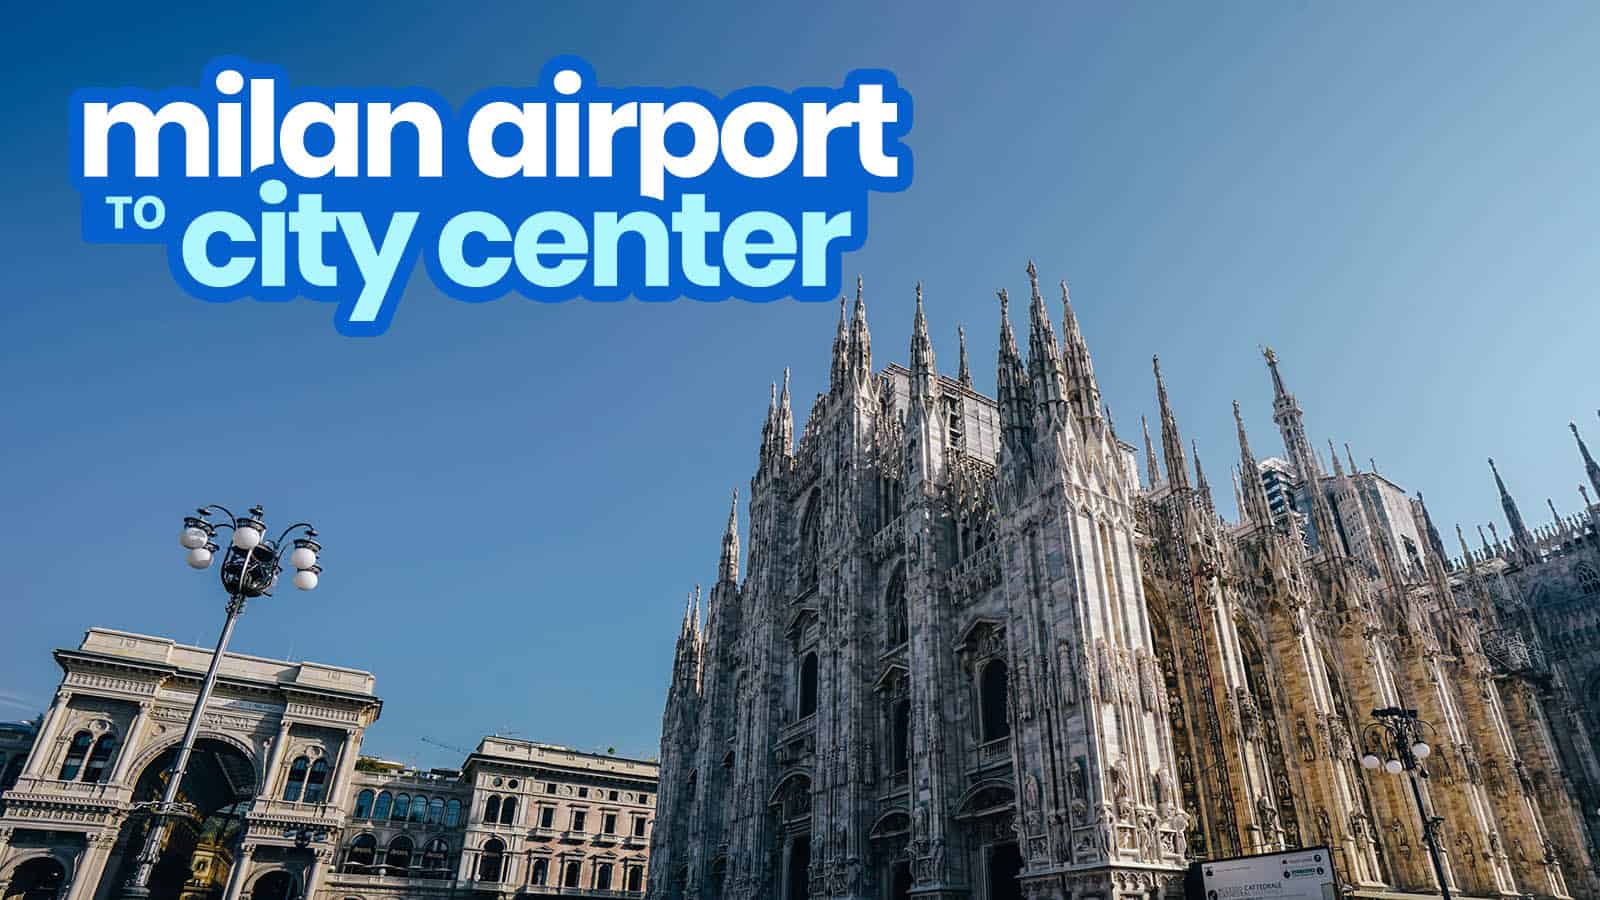 MILAN AIRPORT TO CITY CENTER: From Malpensa & Linate Airports by Bus & by Train